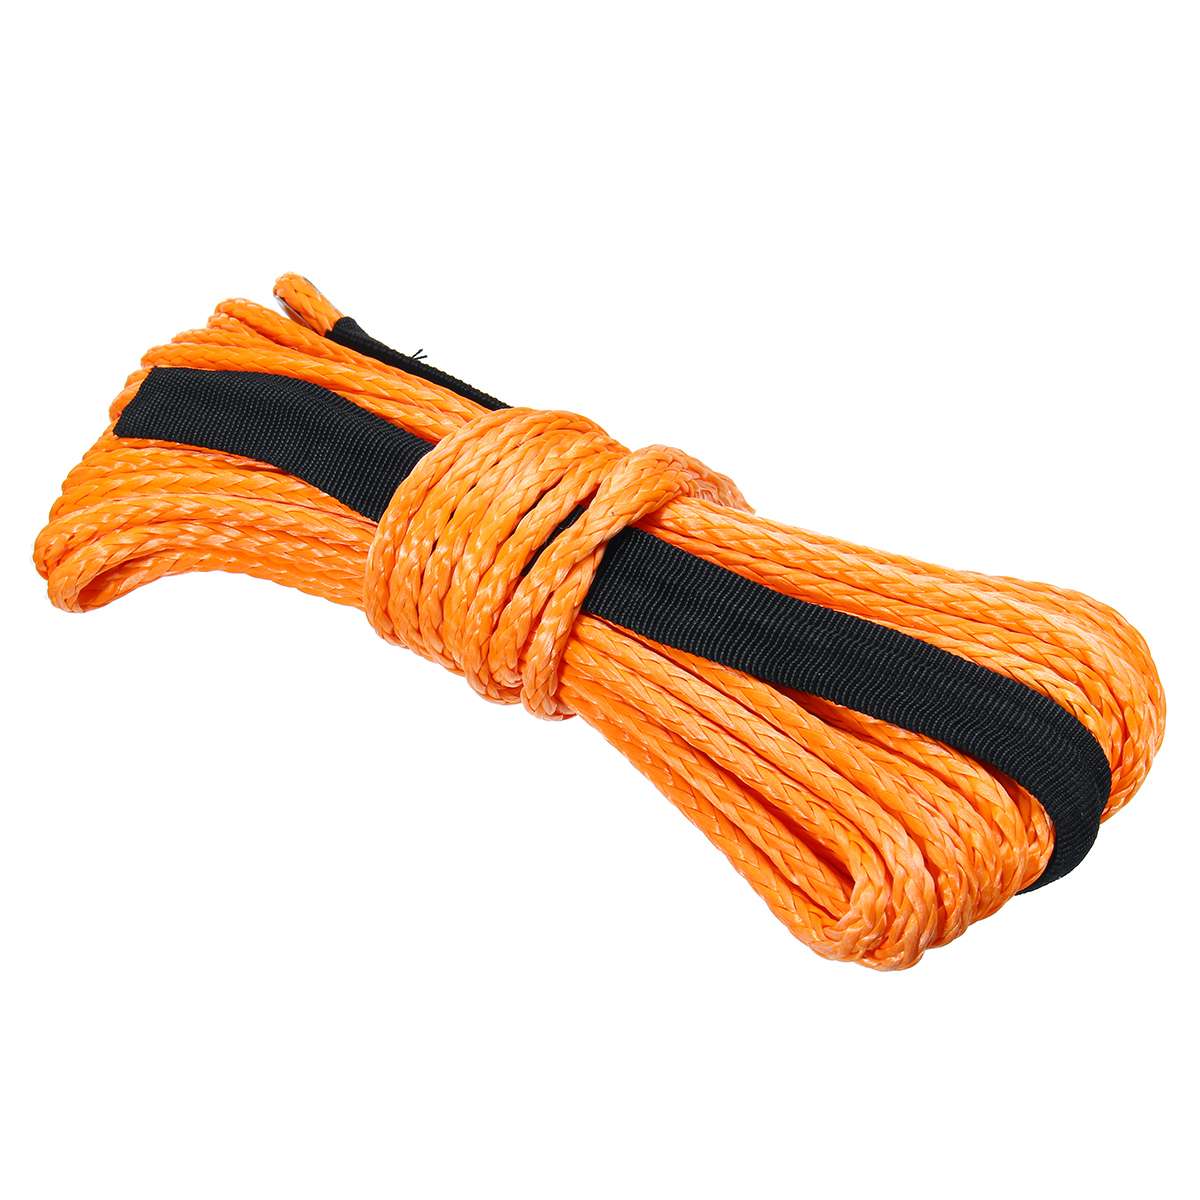 15mx5mm/5.5mm/6mm Winch Rope Towing Cable String Line Synthetic Fiber 5500lbs/7000lbs/7700lbs For Jeep ATV UTV Off-road